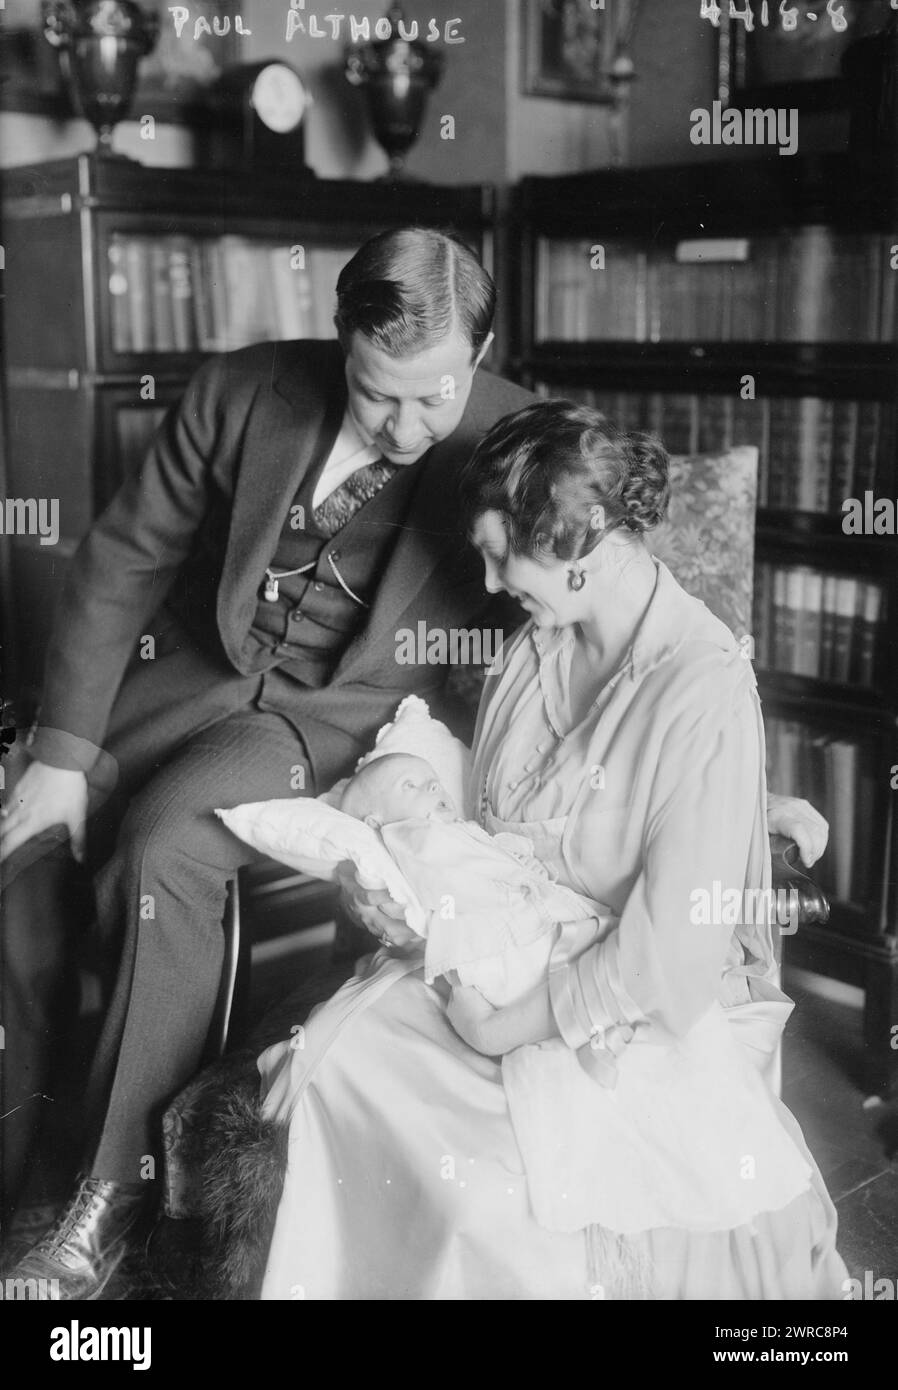 Paul Althouse, Photograph shows American opera singer Paul Shearer Althouse (1889-1954) with his wife Elizabeth Breen (1896-1966) and baby Rita Mary., between ca. 1915 and ca. 1920, Glass negatives, 1 negative: glass Stock Photo